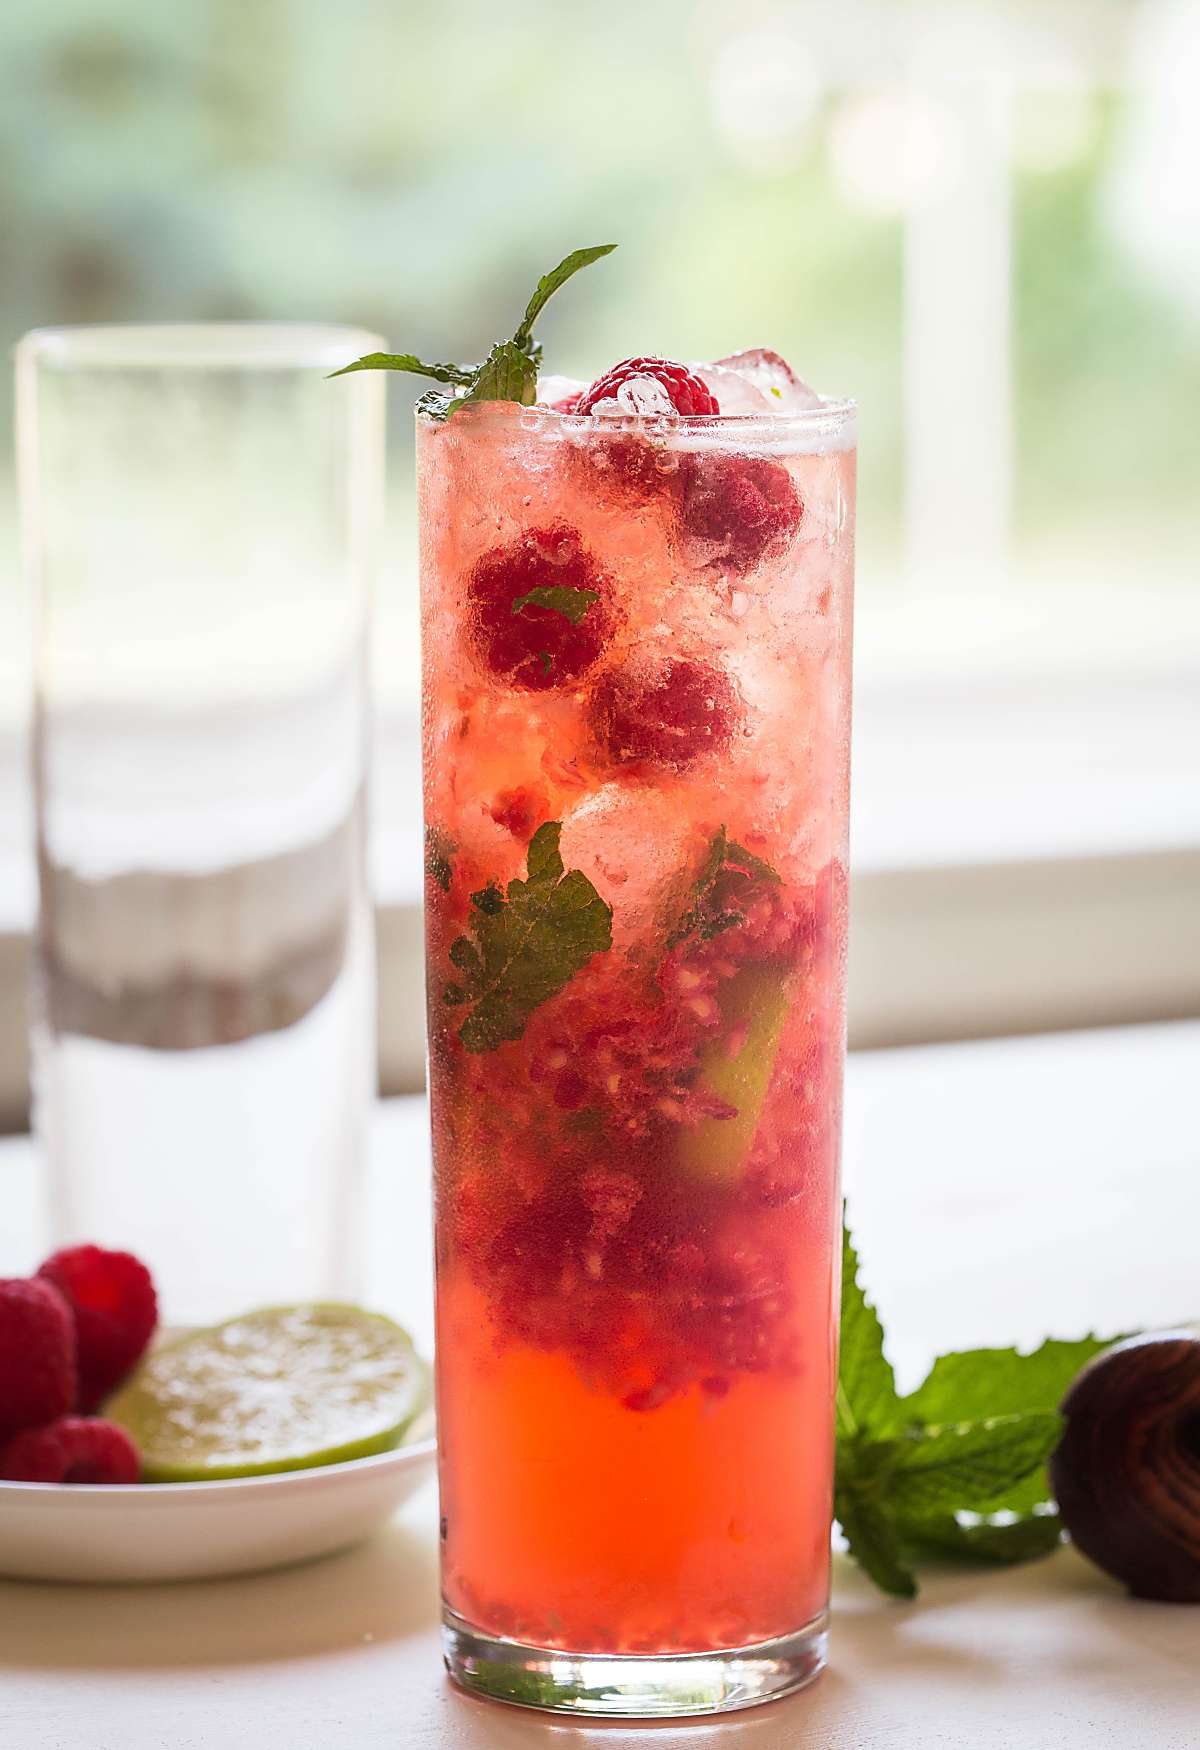 Non Alcoholic Raspberry Mojito - make this delicious drink using fresh raspberries, lime, mint, and sparkling apple cider. It will make you crave for more